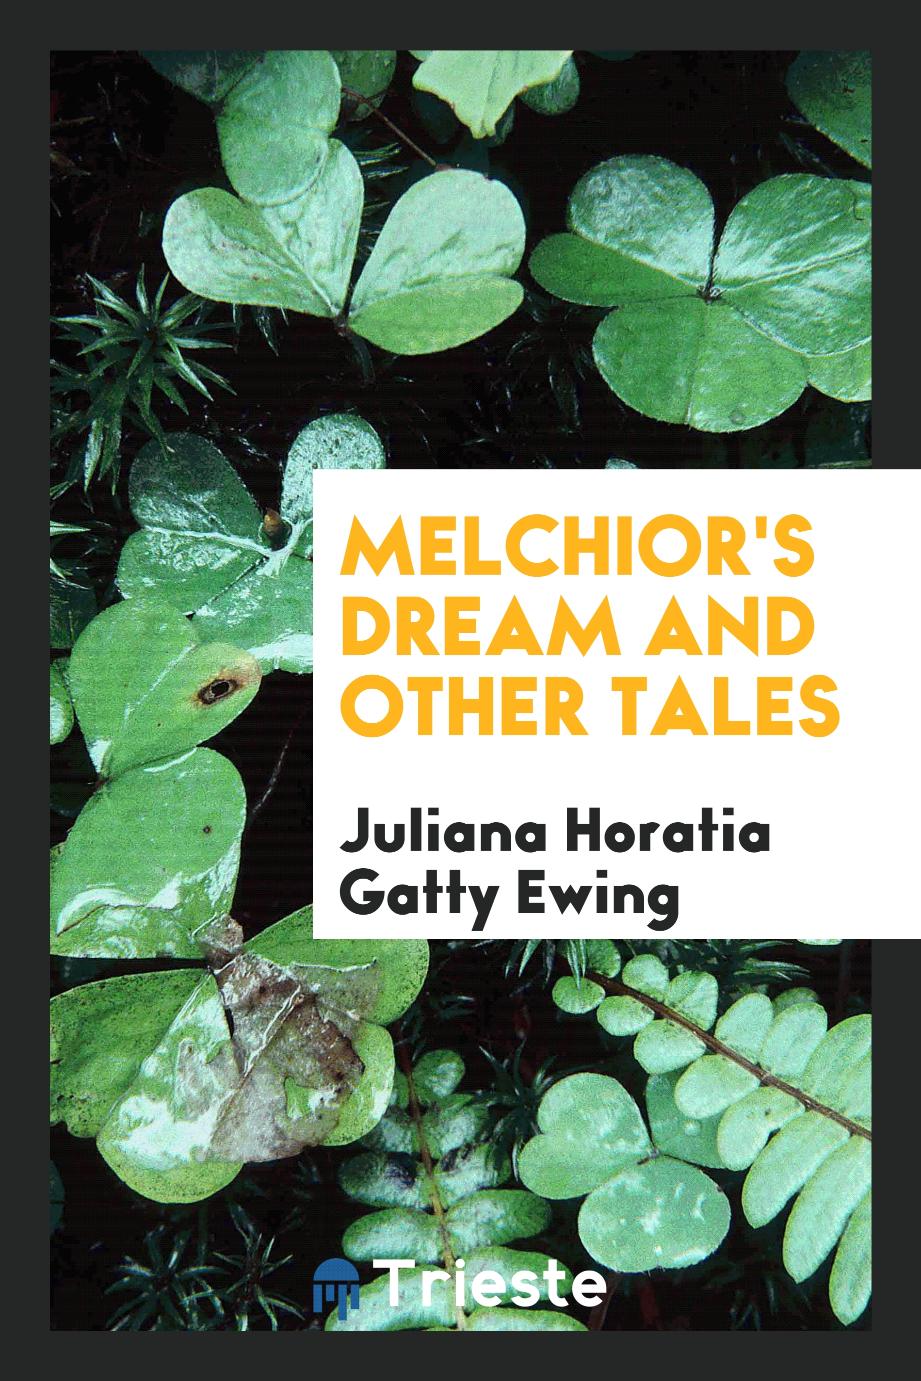 Melchior's dream and other tales